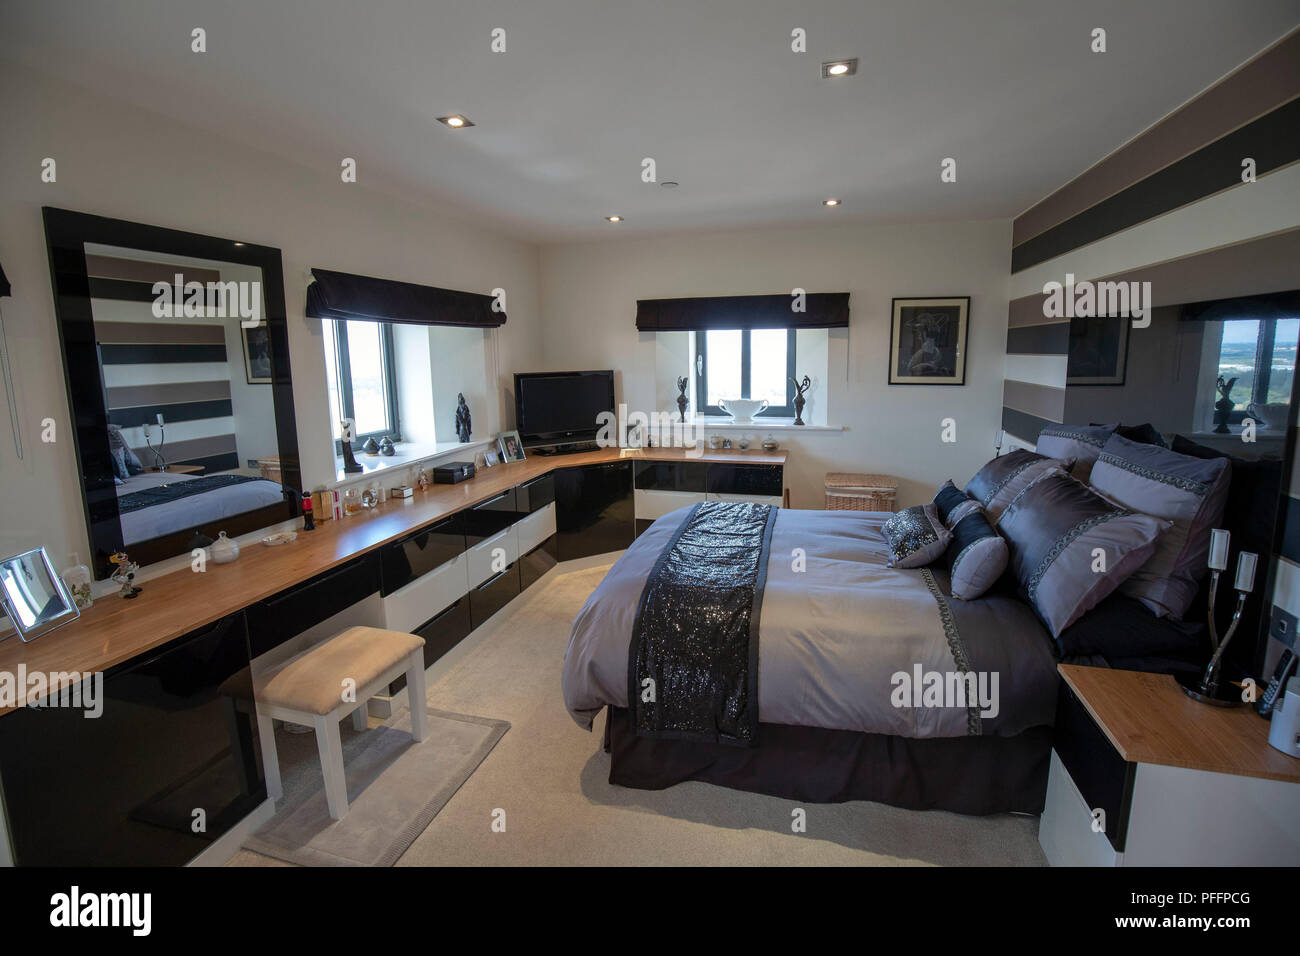 A general view of the penthouse flat of Shenley Tower in Radlett, Hertfordshire, where the flat has gone on sale. Stock Photo